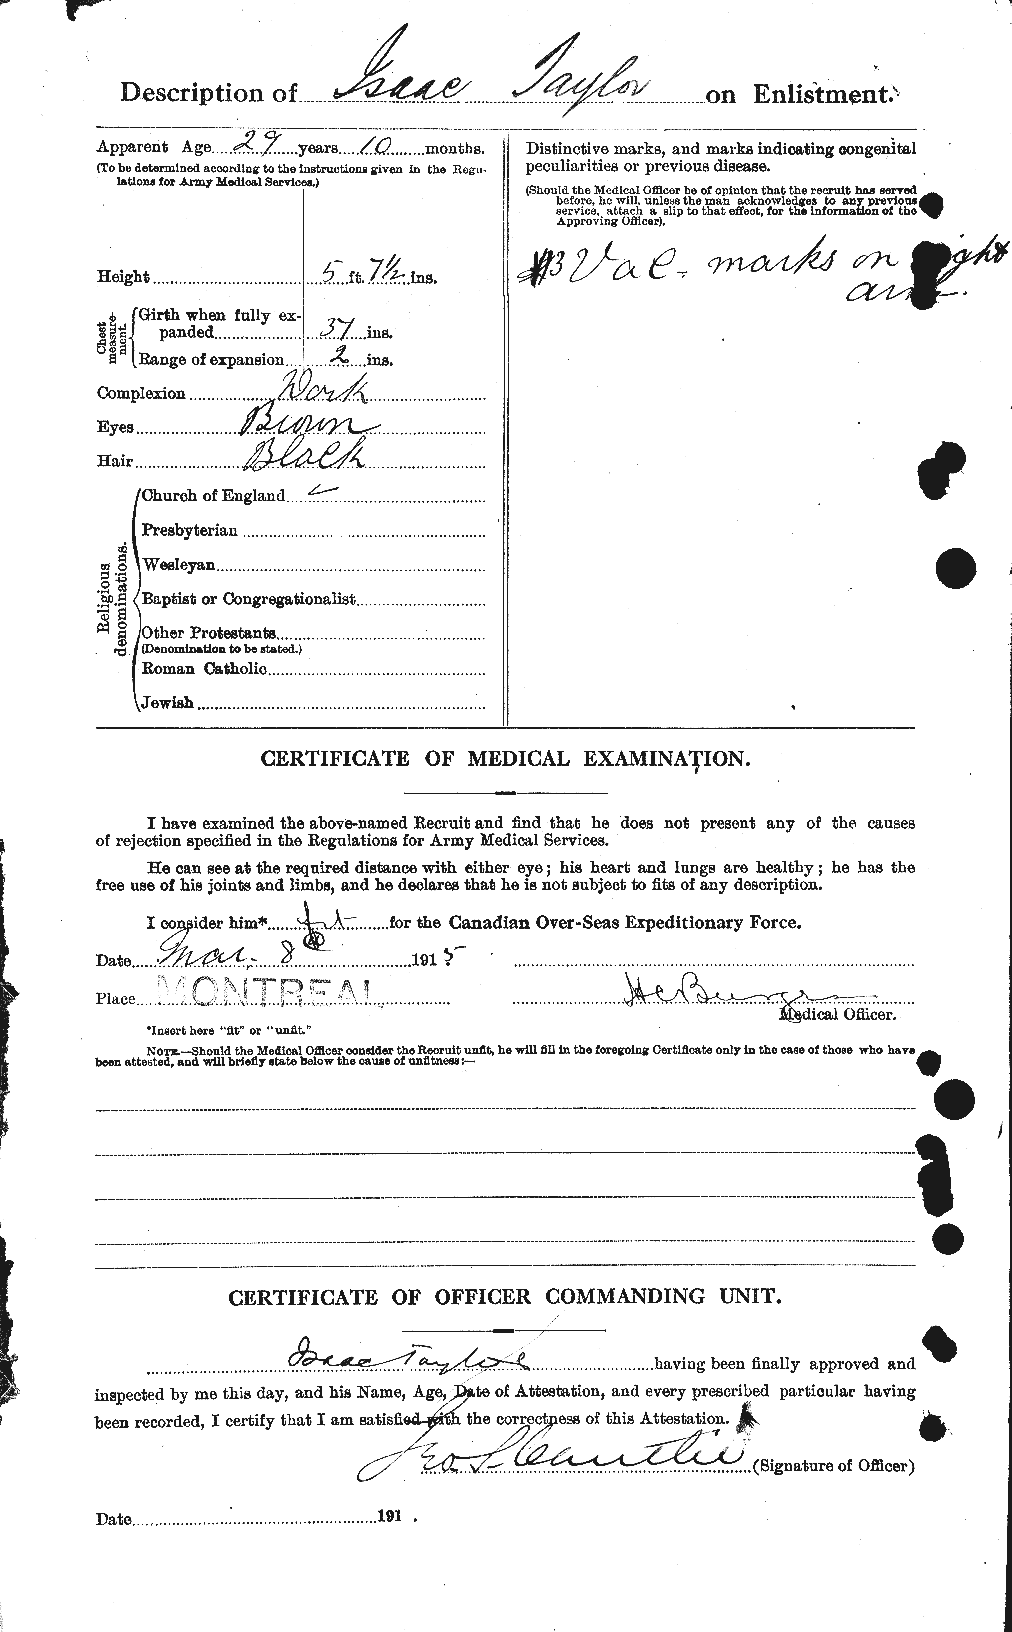 Personnel Records of the First World War - CEF 626629b